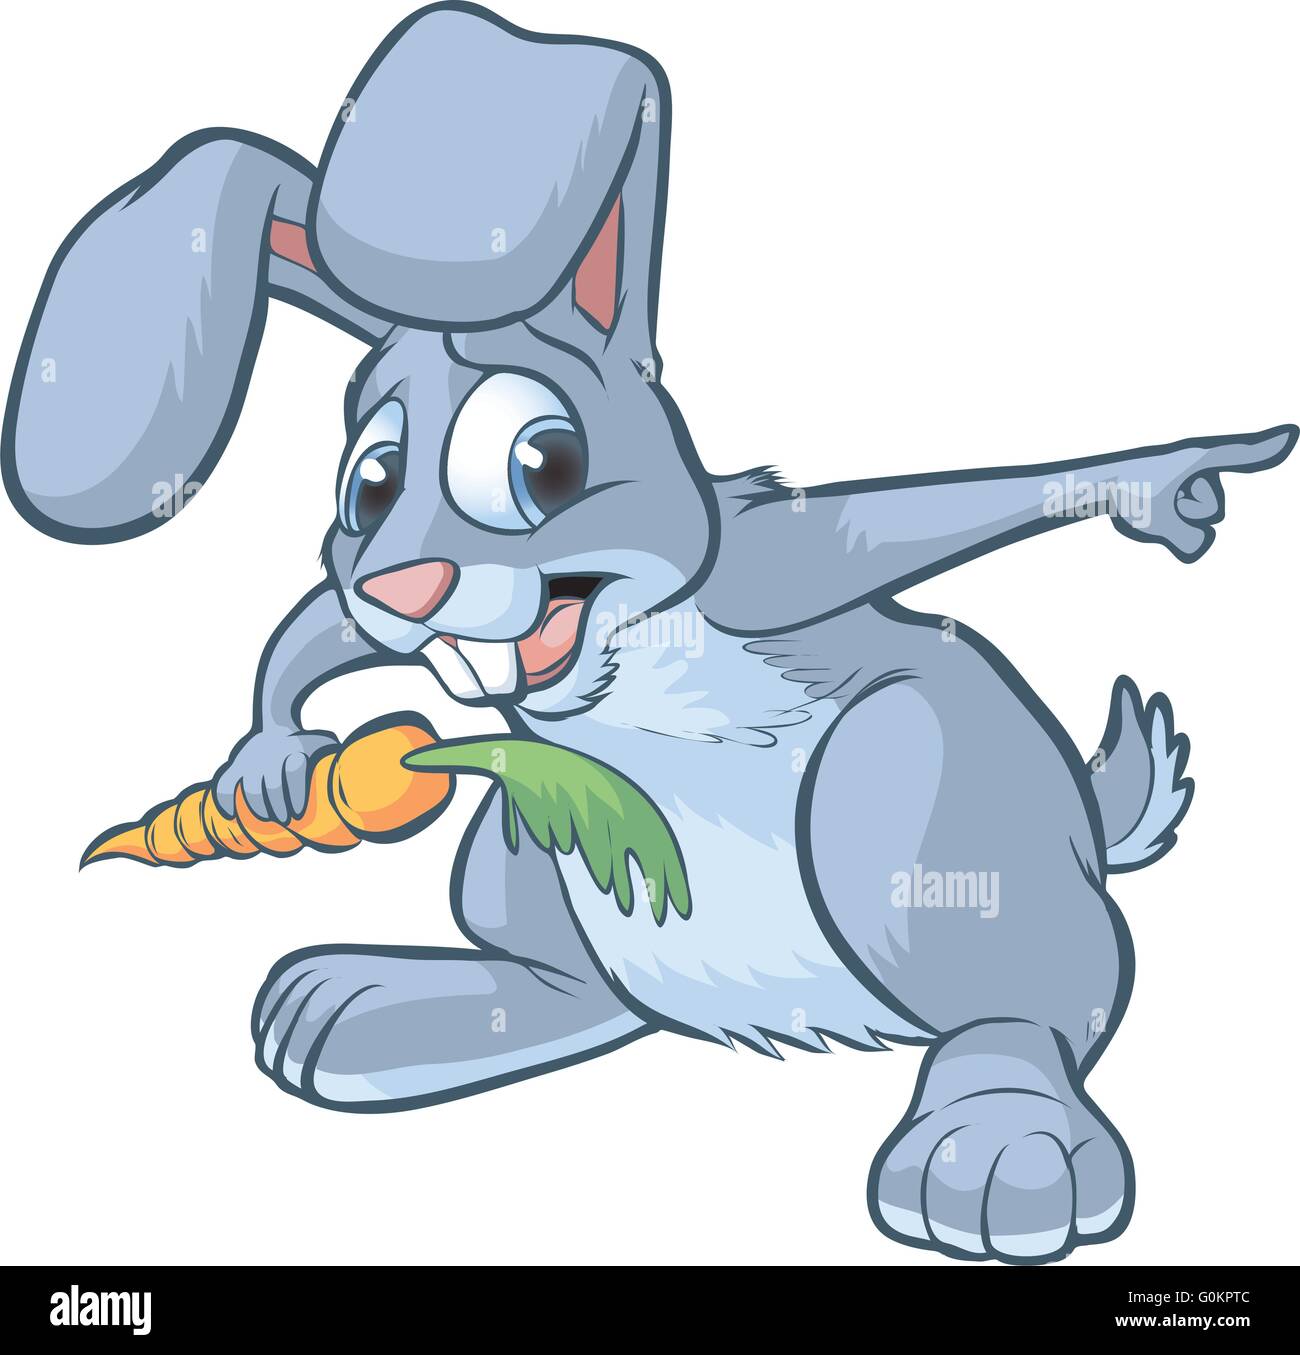 Vector cartoon clip art of a scared gray bunny or rabbit holding a carrot and pointing to the right. Stock Vector